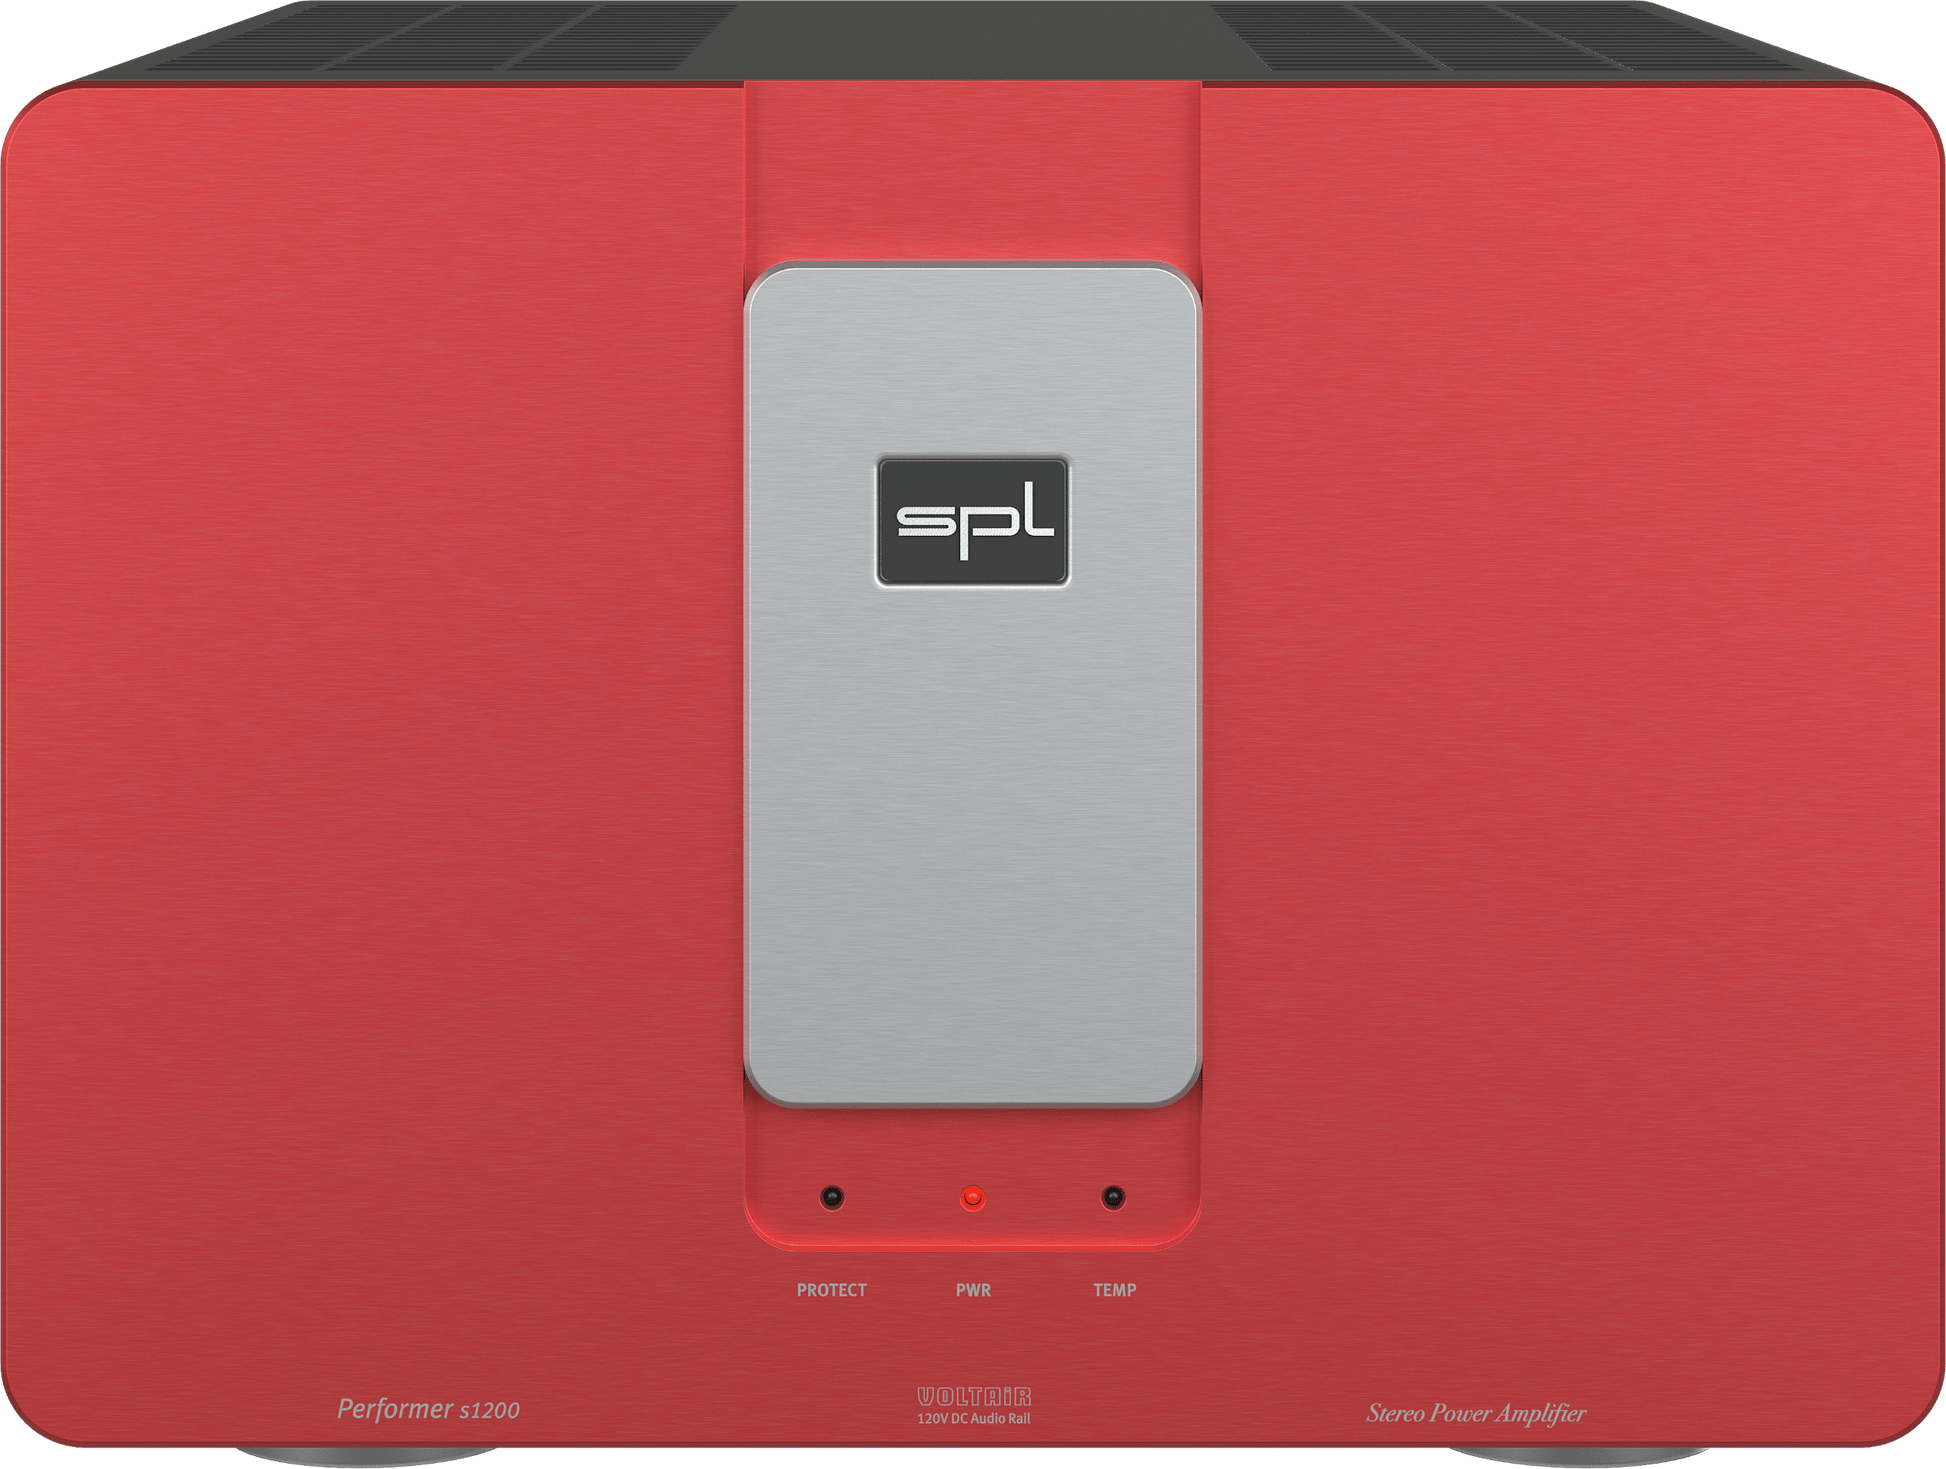 SPL Audio Performer s1200 Stereo Power Amplifier in red with silver insert